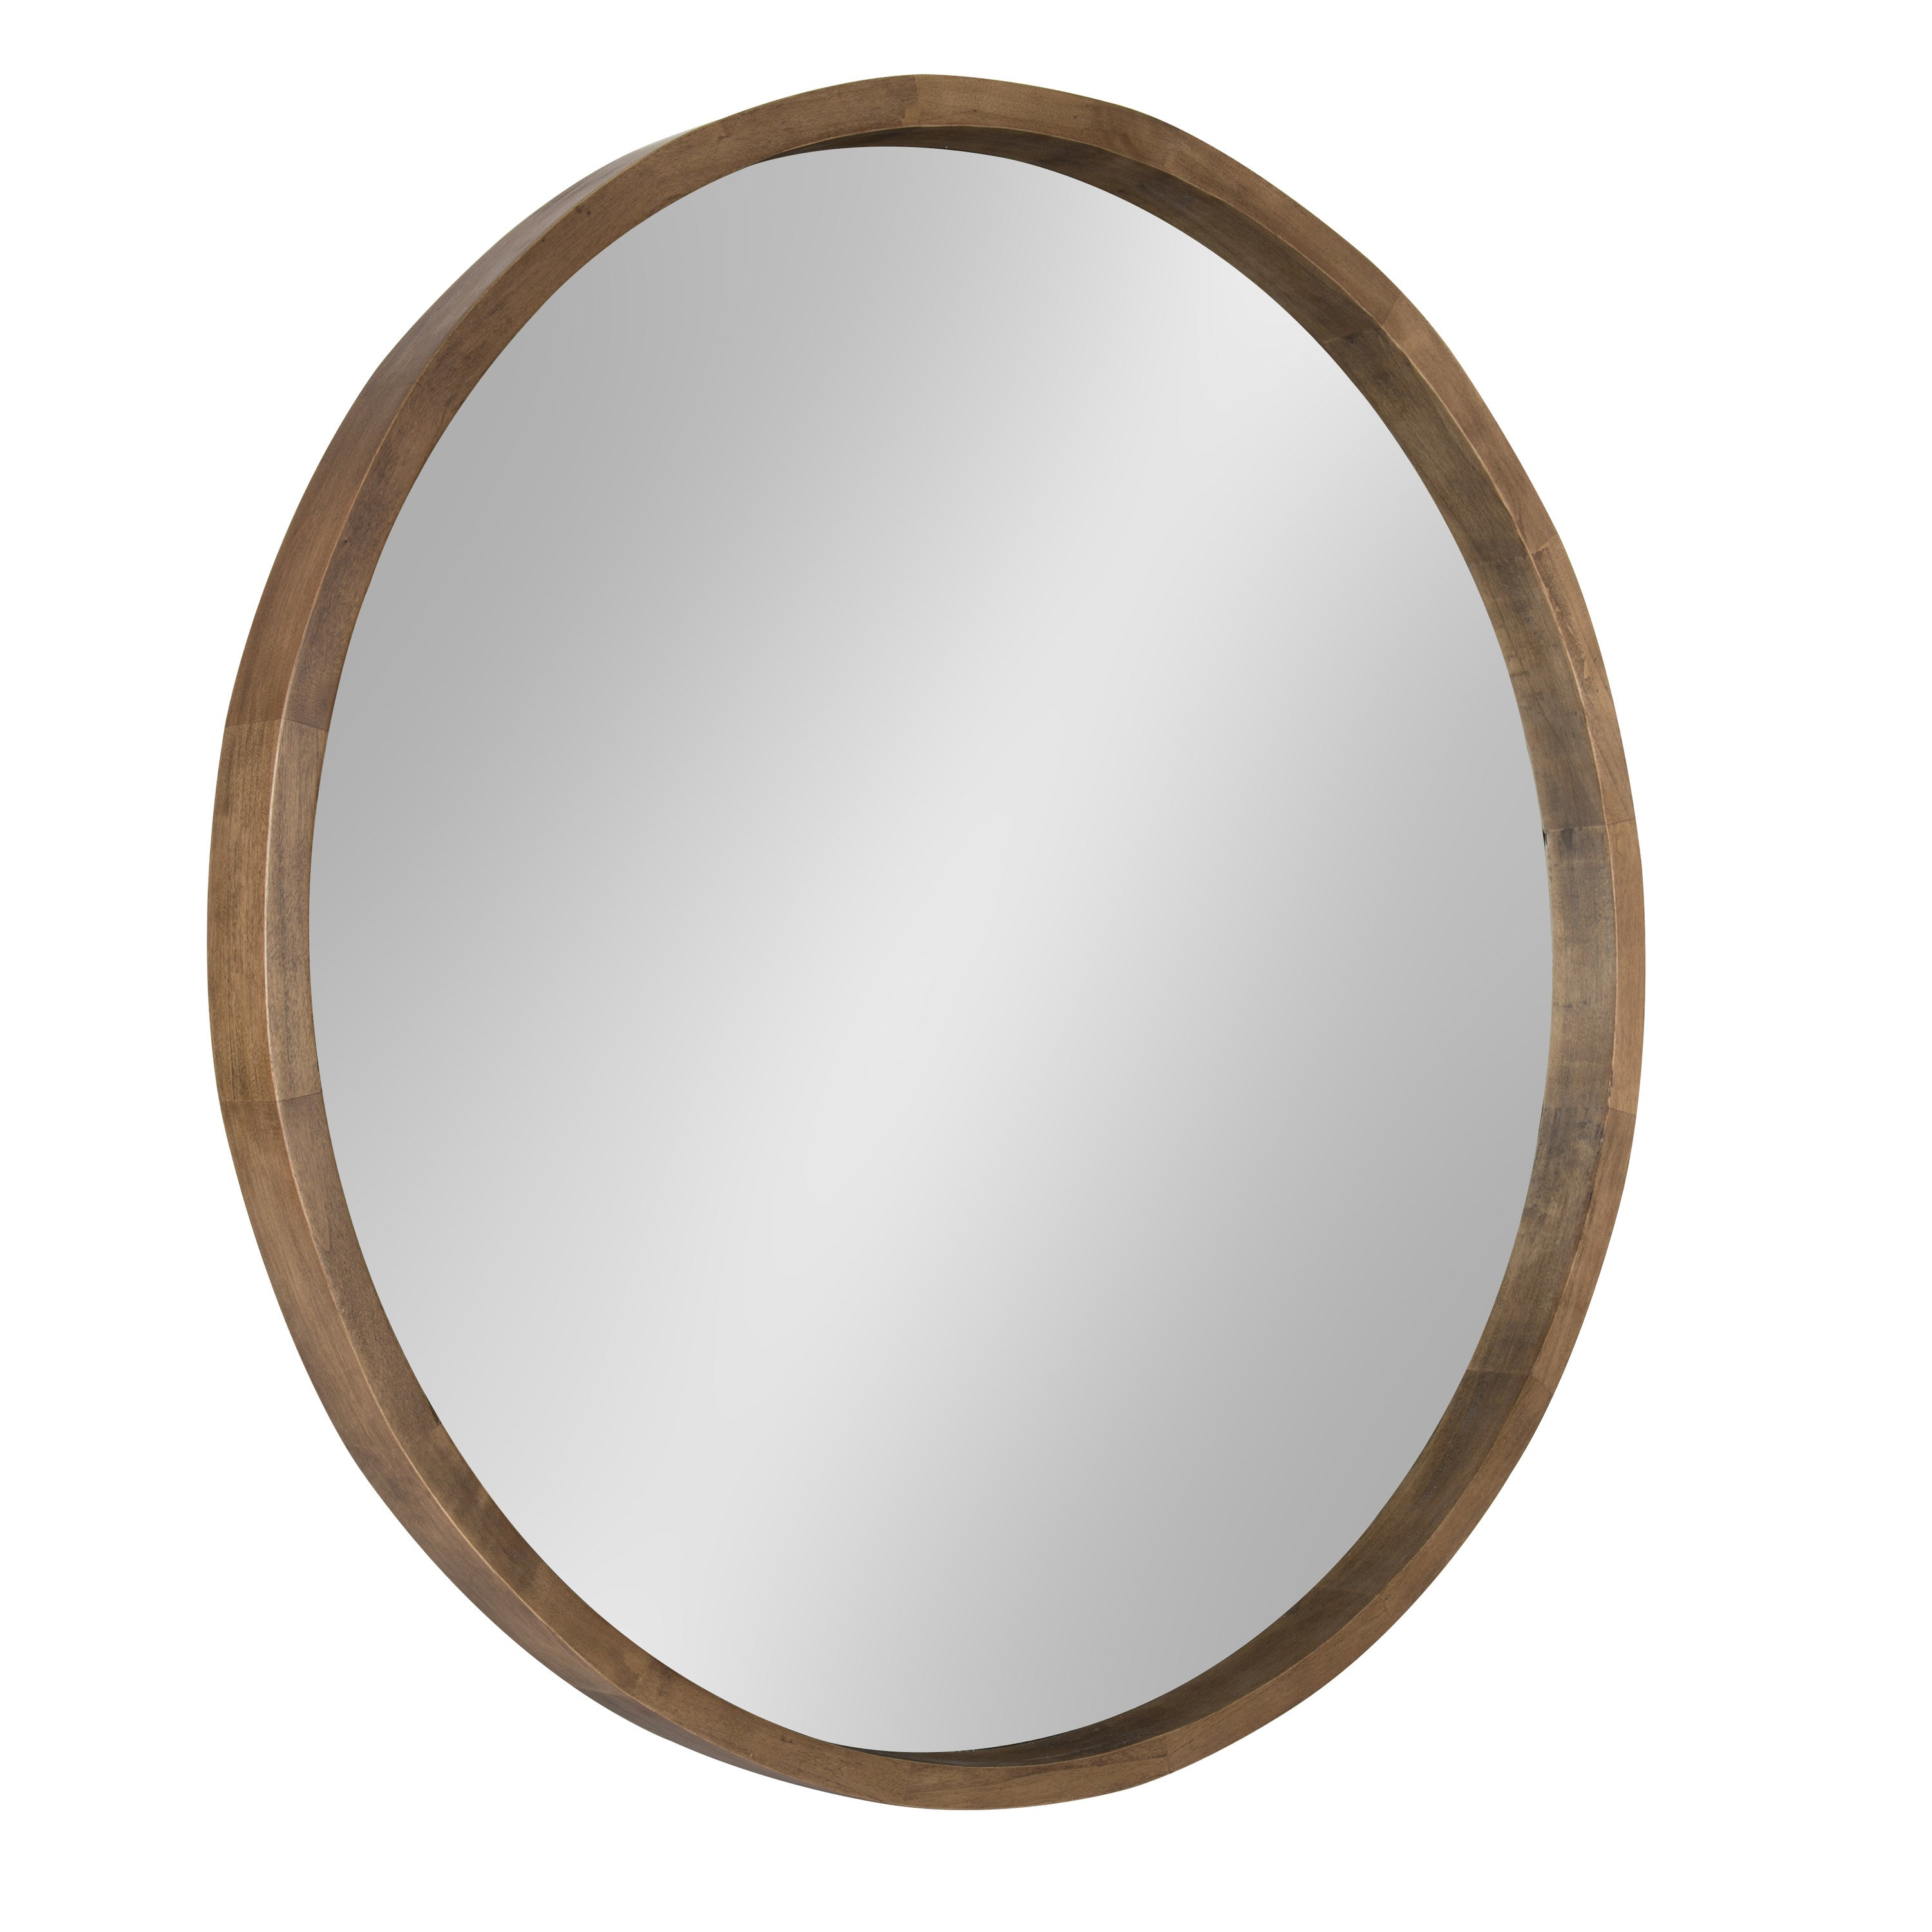 Kate and Laurel Hutton Round Wood Wall Mirror, 36 Diameter